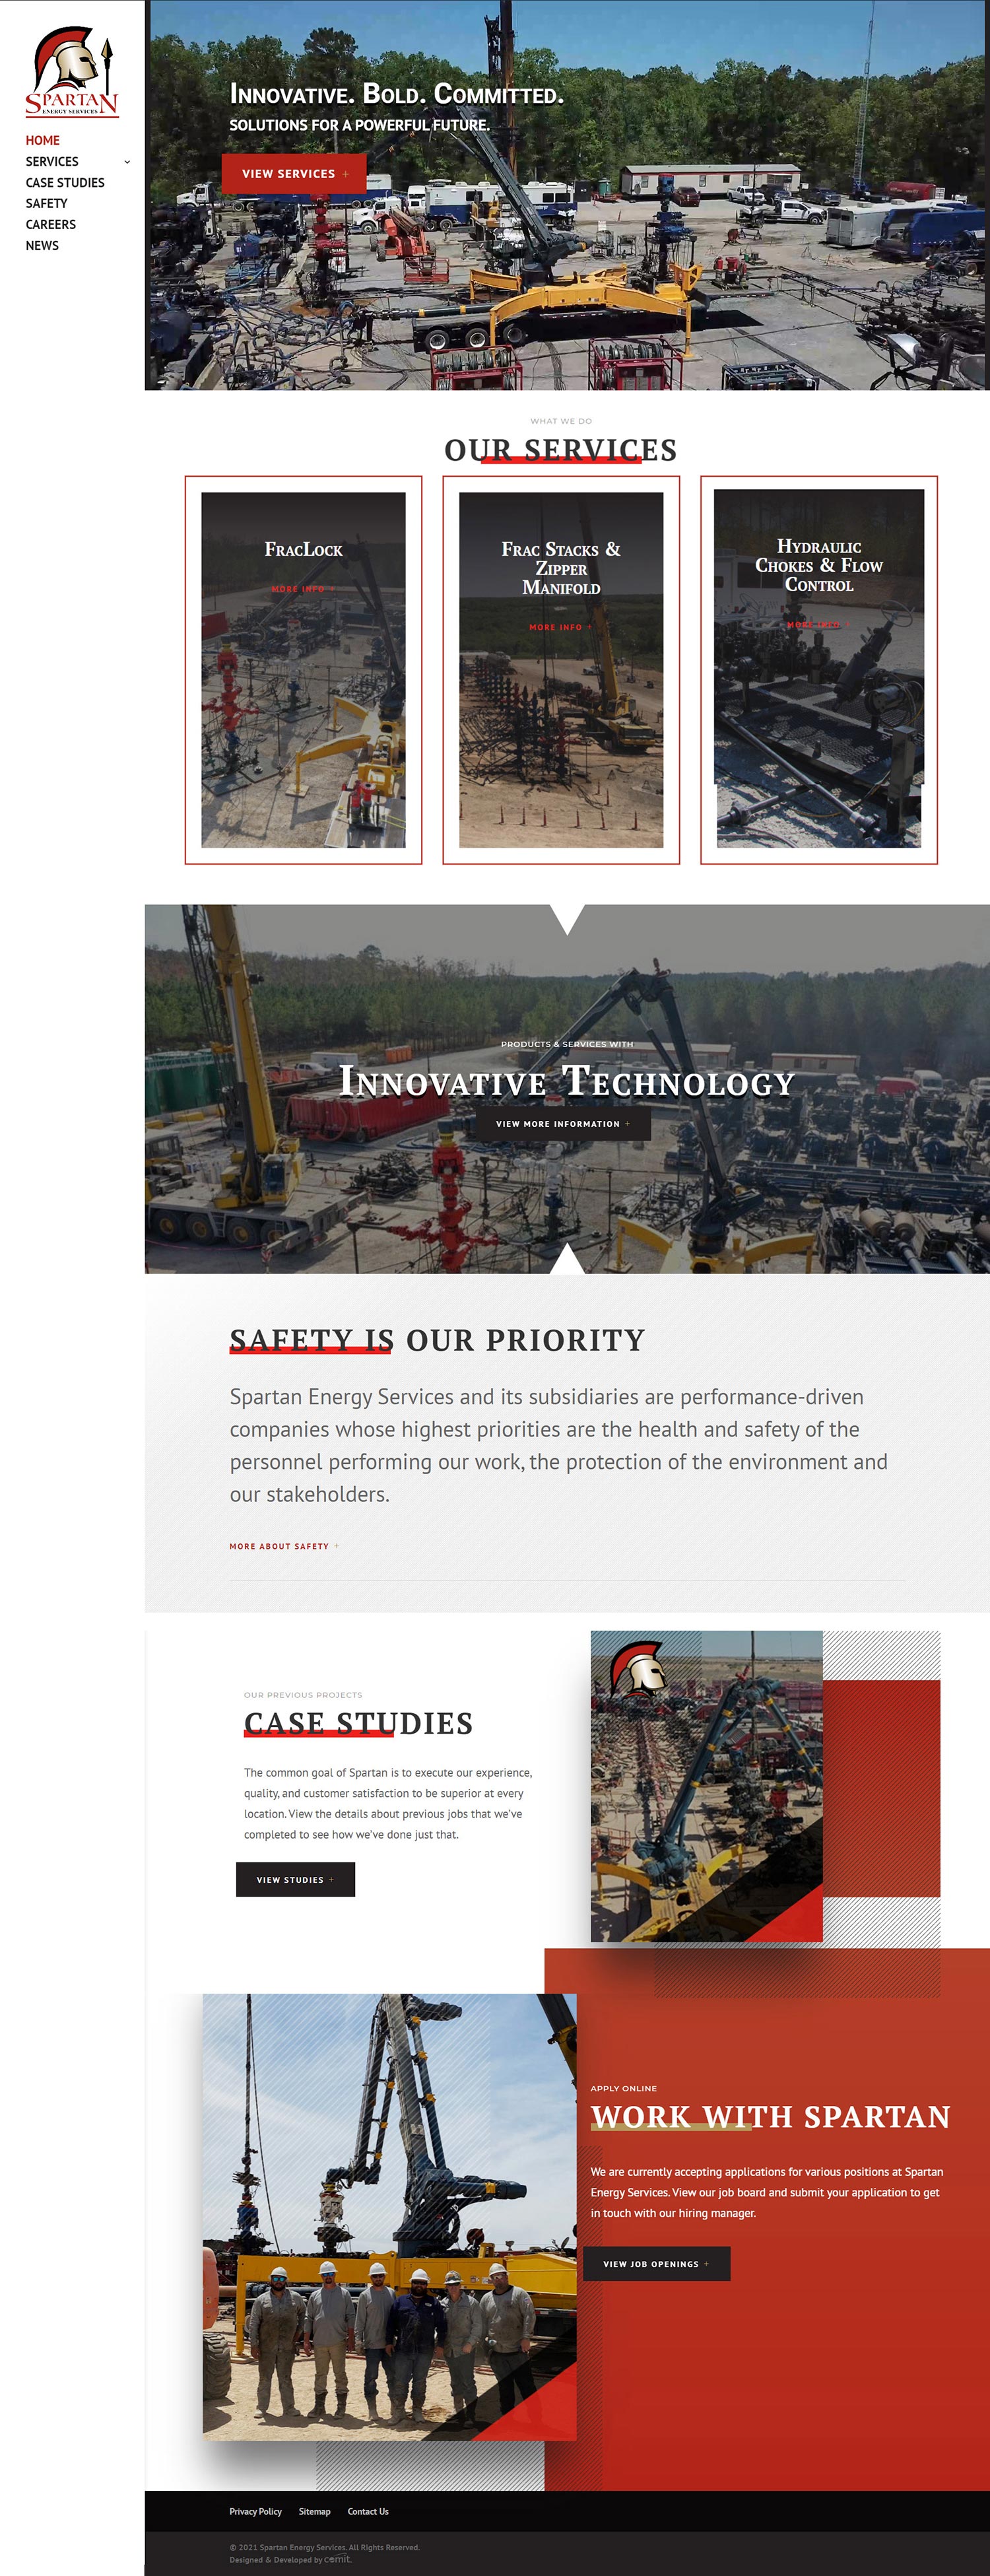 Spartan Energy Services Home Page Mockup